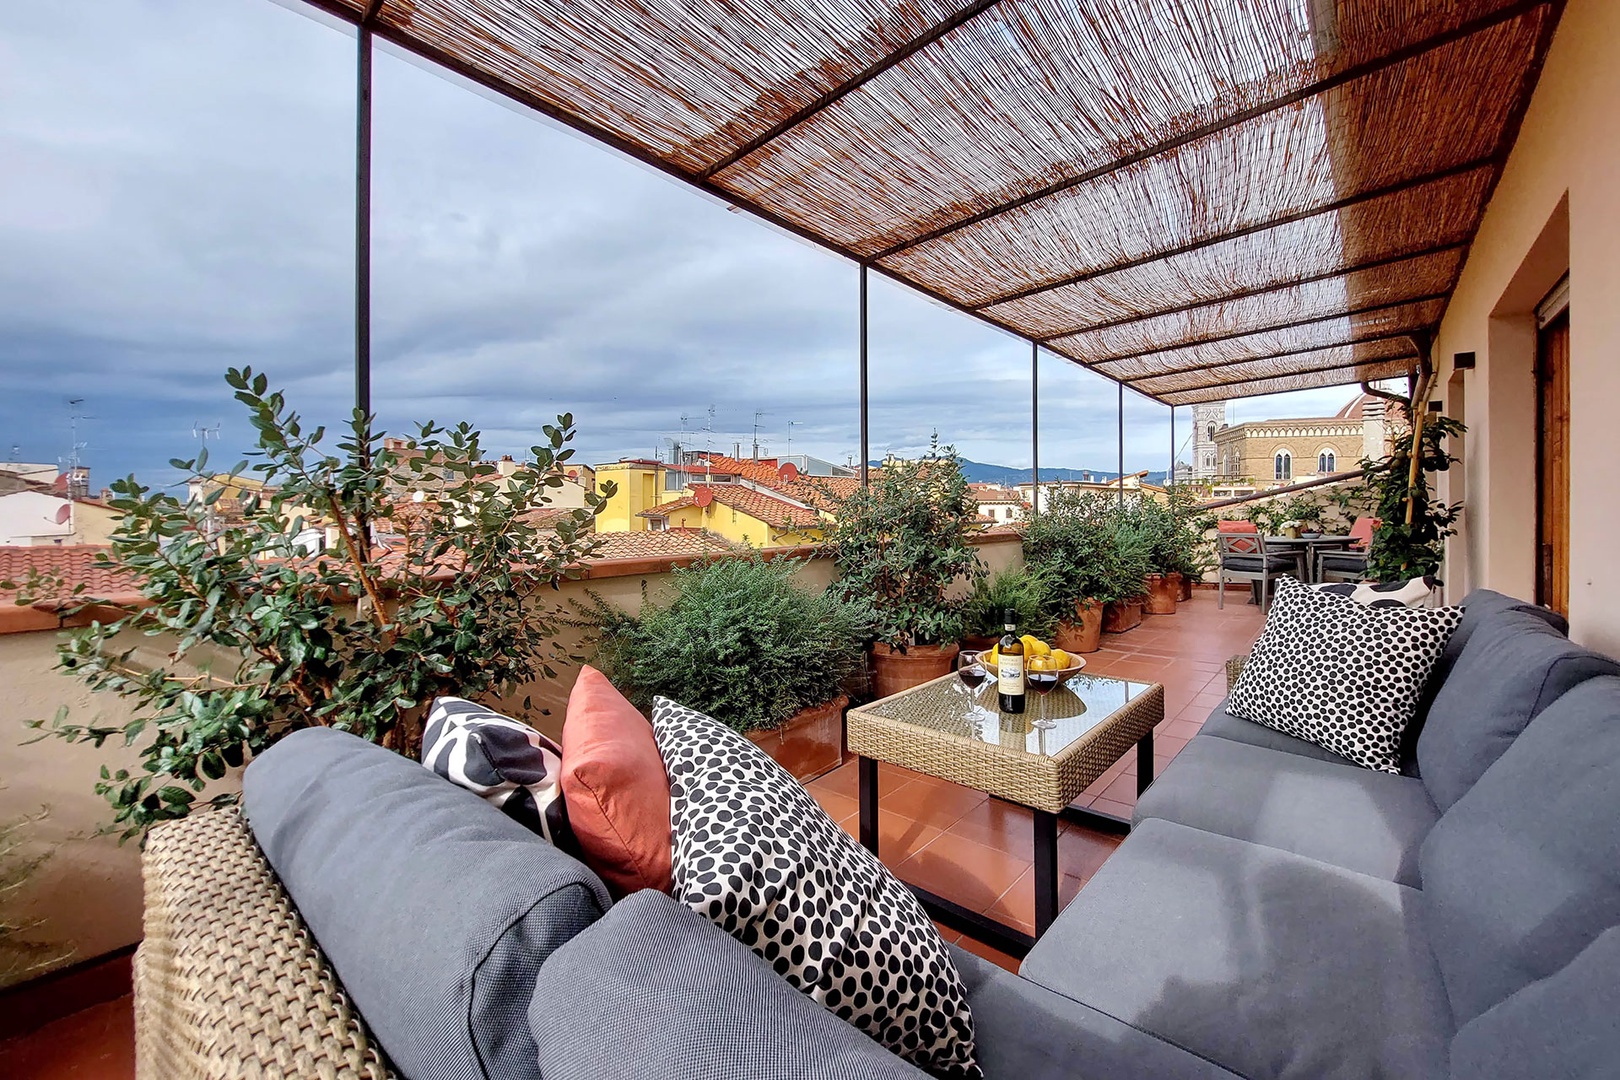 A beautiful and large terrace is the perfect spot to relax and enjoy the view.